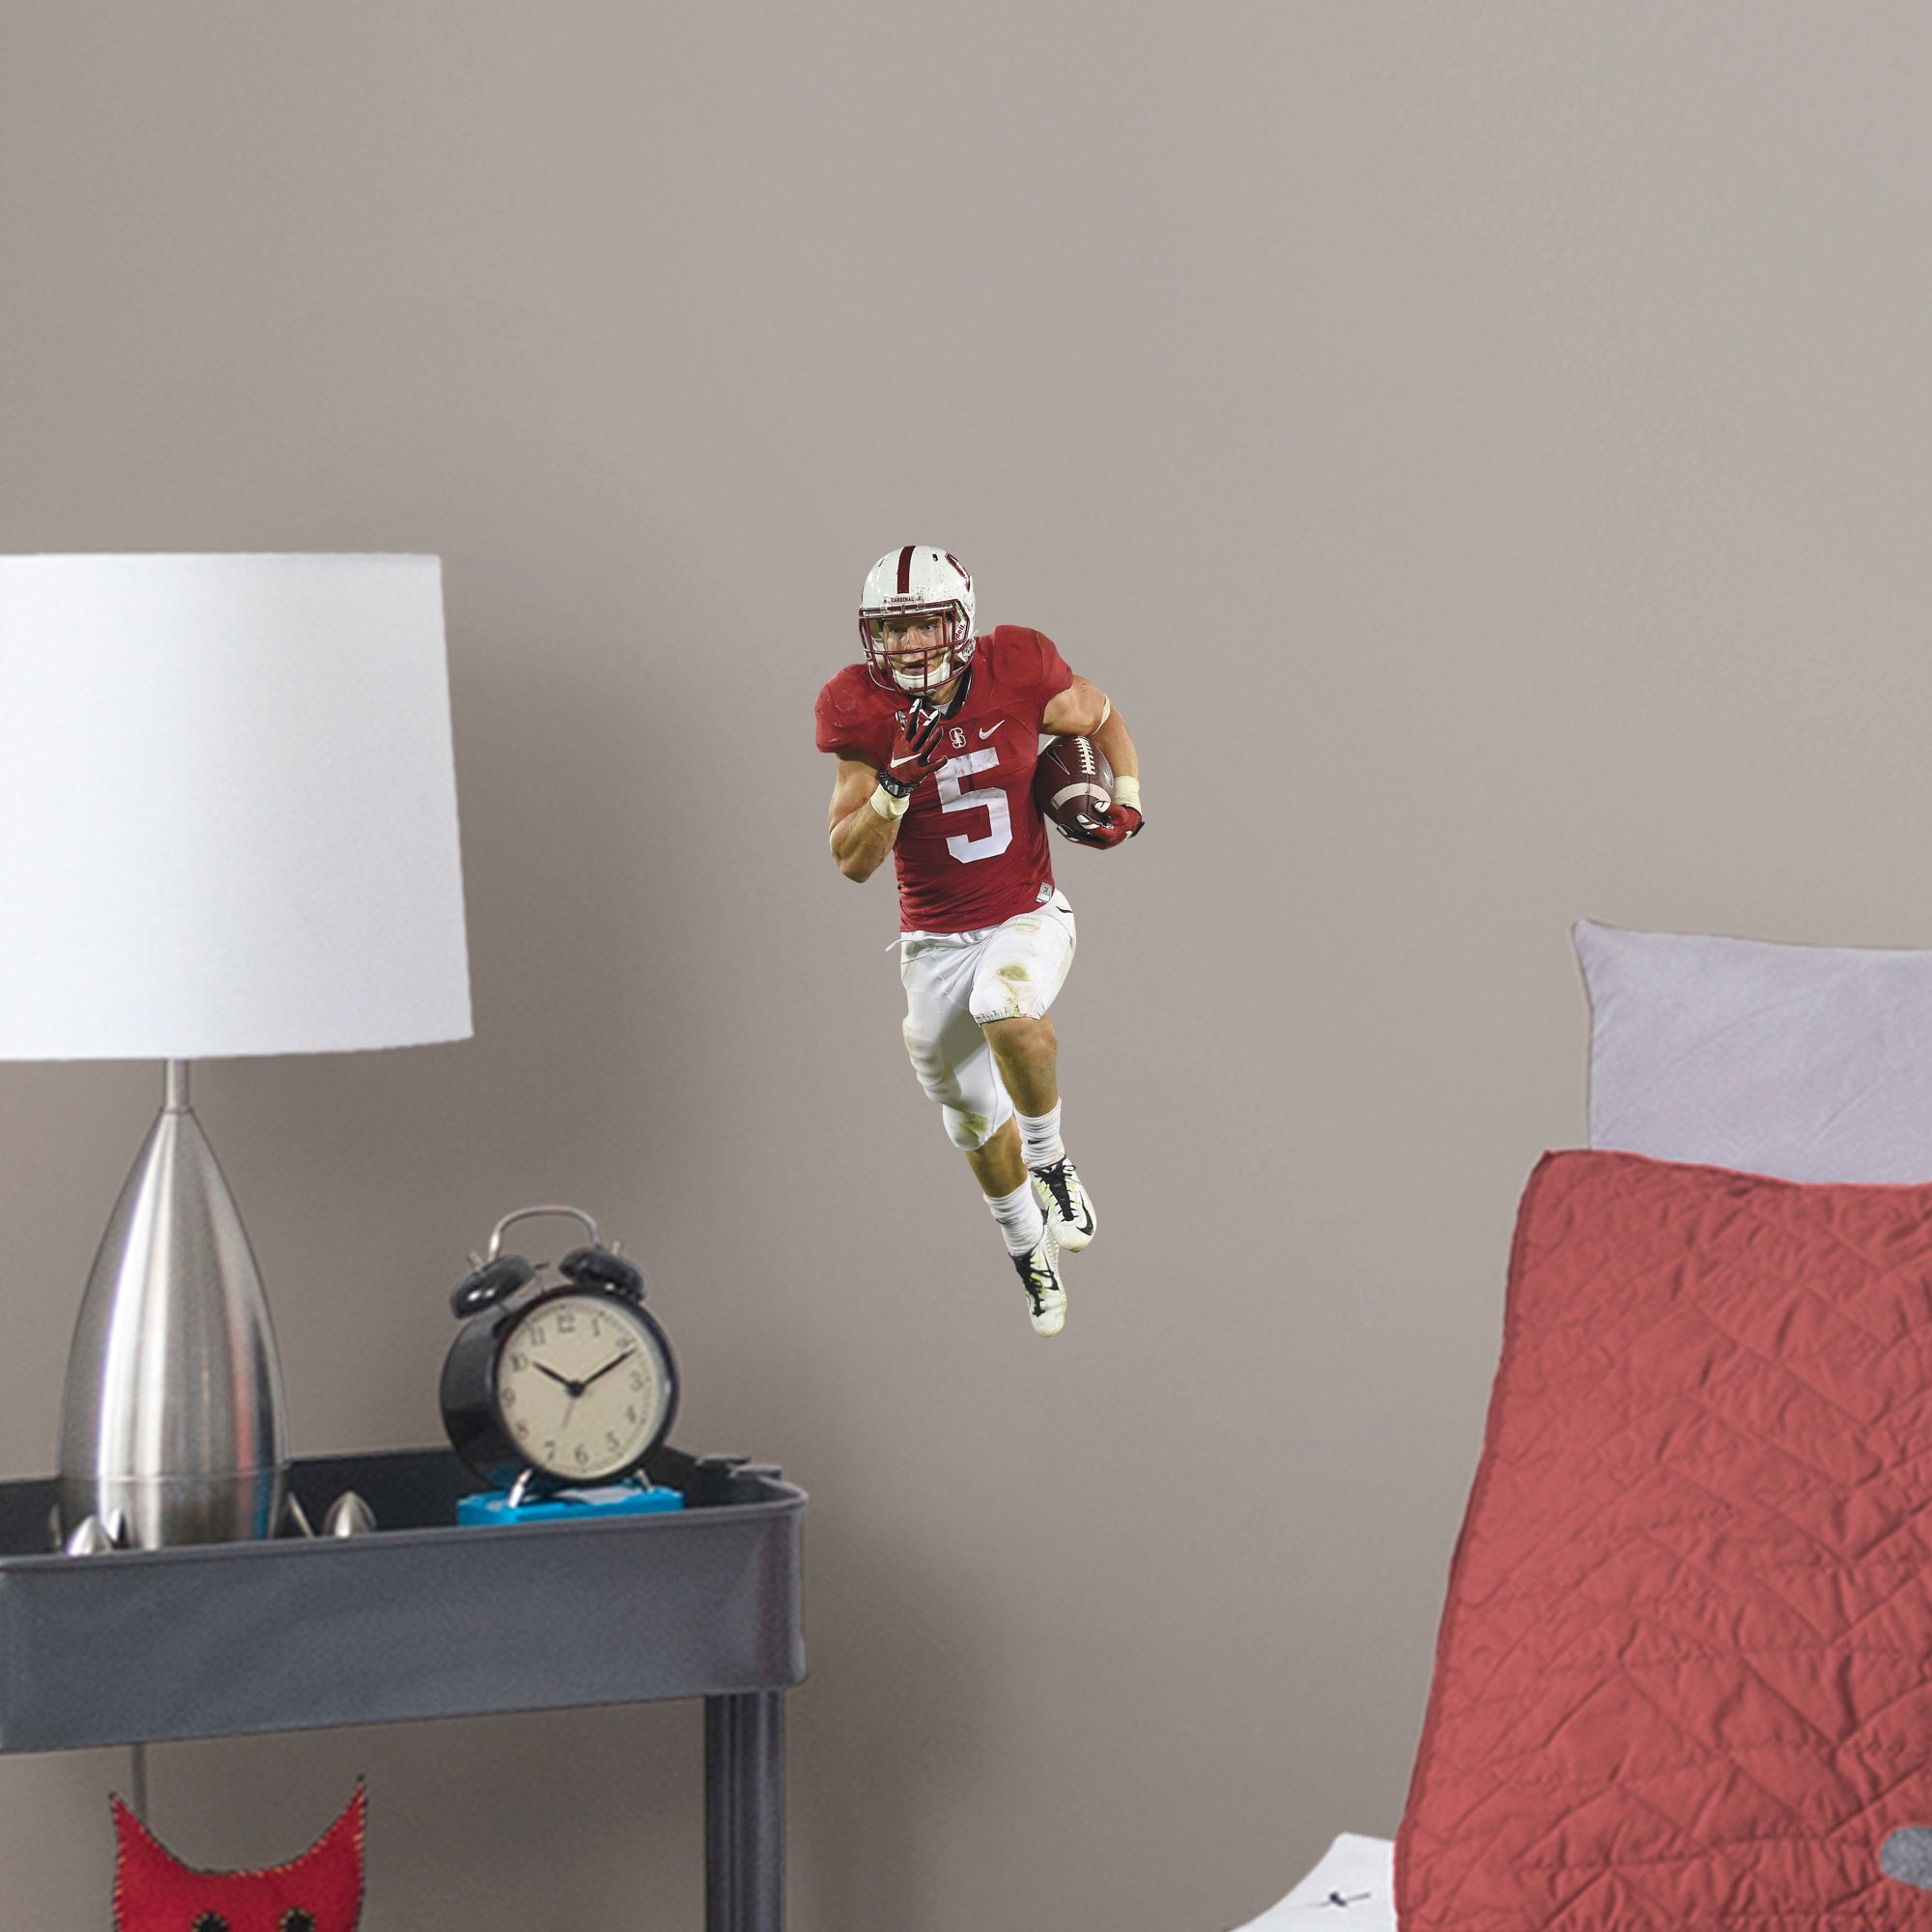 Christian McCaffrey for Stanford Cardinal: Stanford - Officially Licensed Removable Wall Decal Large by Fathead | Vinyl